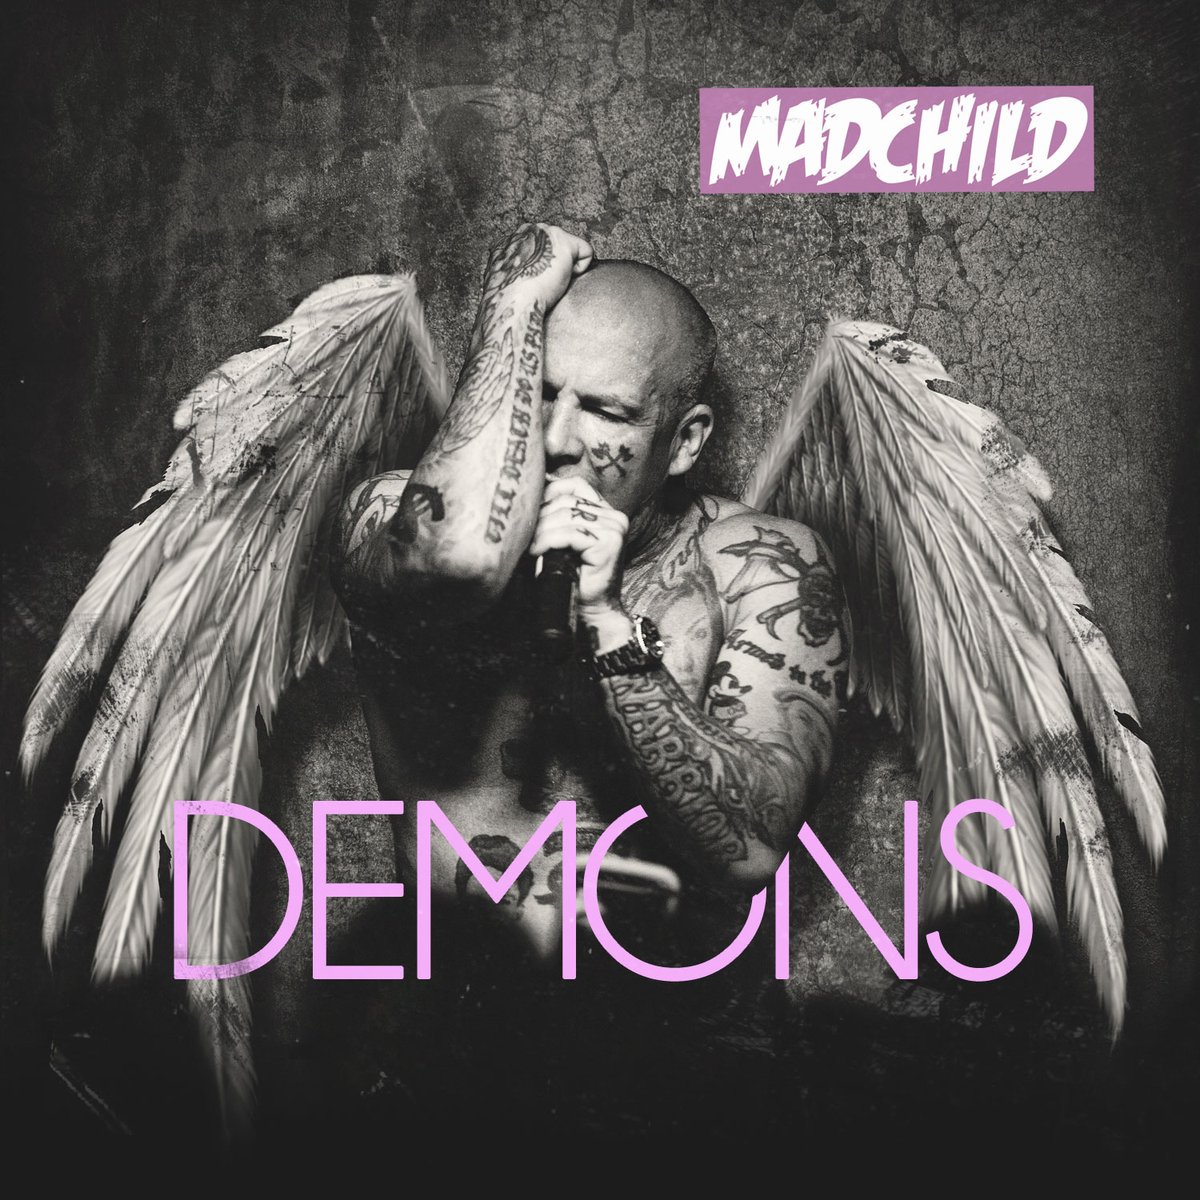 ON THIS DAY 5 YEARS AGO SUB NOIZE OG @madchild57 dropped ‘DEMONS’ .. Who’s bumping this one? What’s your favorite Madchild track? Hit the comments and let us know 👇👇

#subnoize25 #suburbannoizerecords #undergroundmusic #surf #skate #weed #srh #srhproductions #madchild